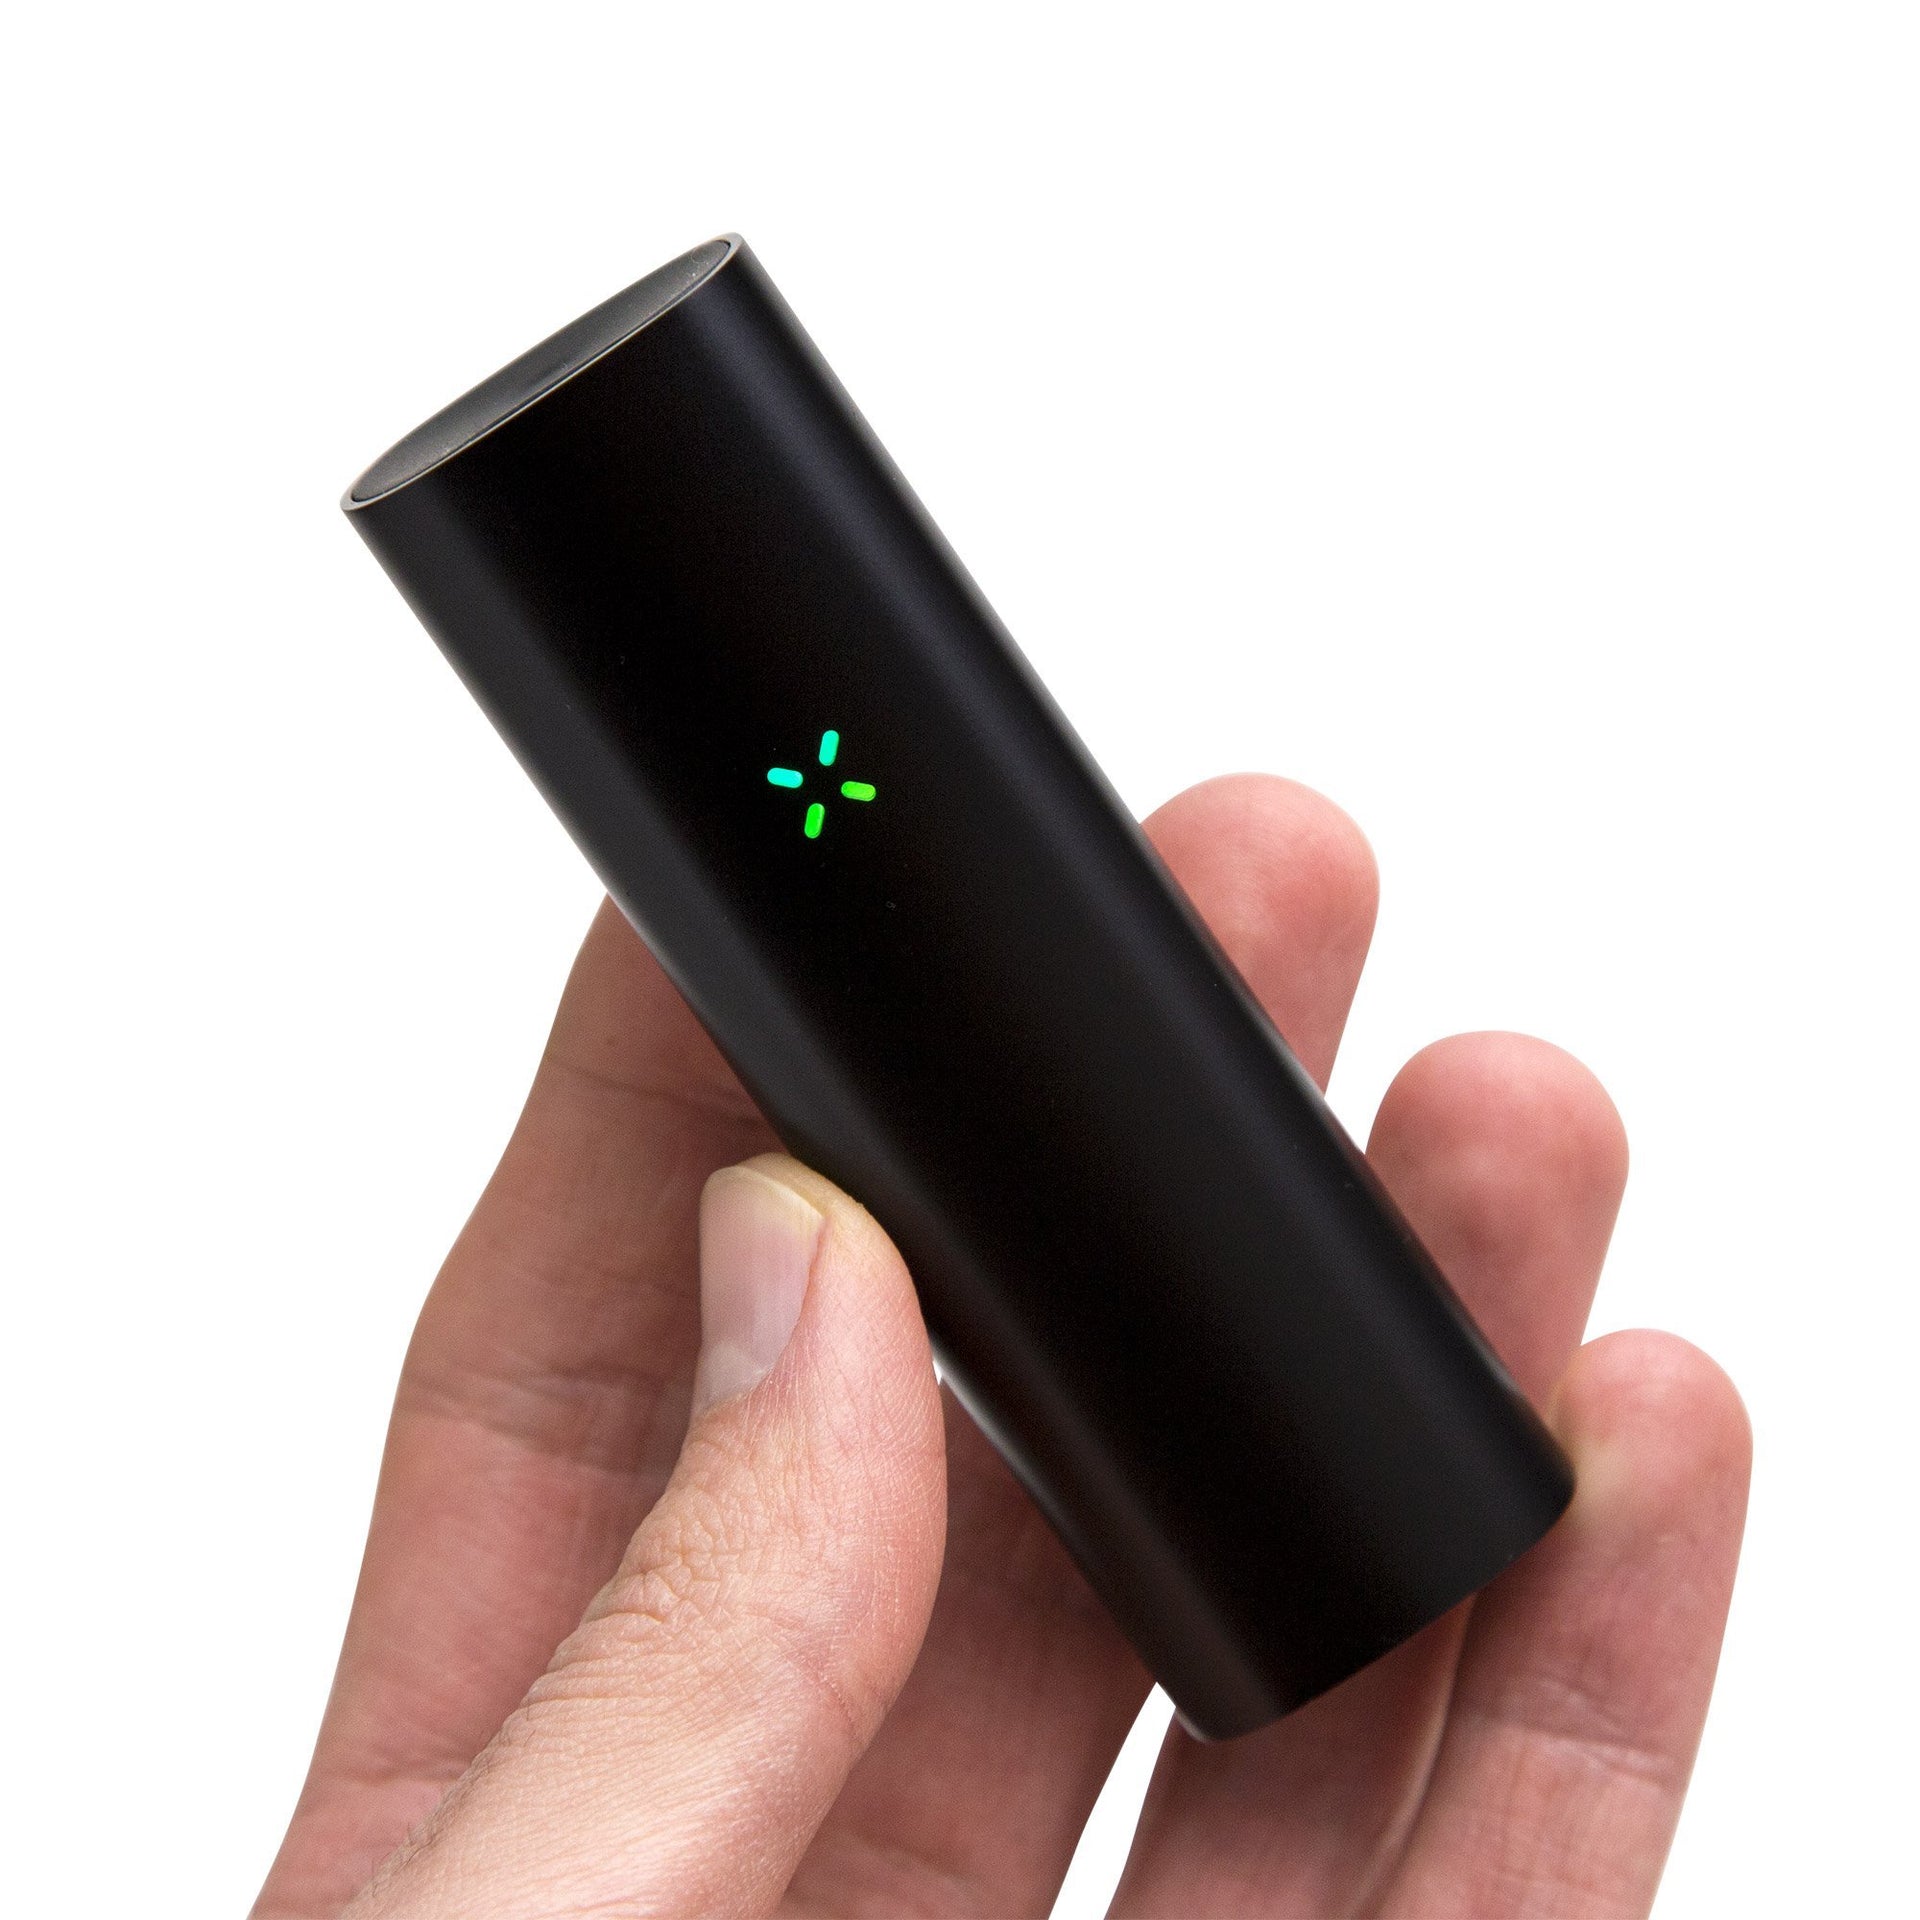 PAX 3 vaporizer: for an epic cannabis experience